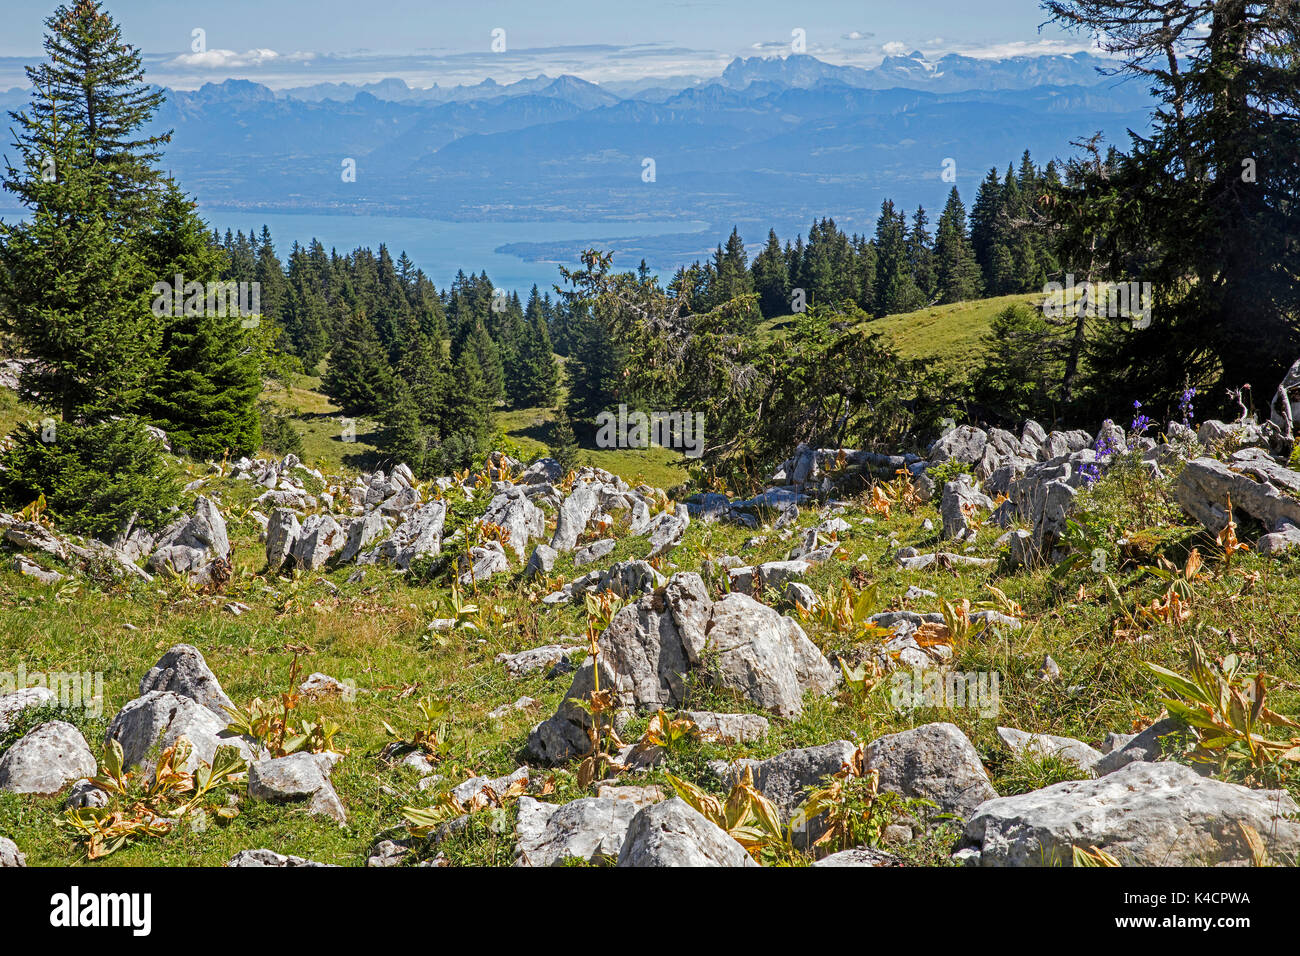 View from La Dôle, mountain of the Jura, canton of Vaud, overlooking Lake Geneva and Alpine mountain peaks of the Swiss Alps in Switzerland Stock Photo